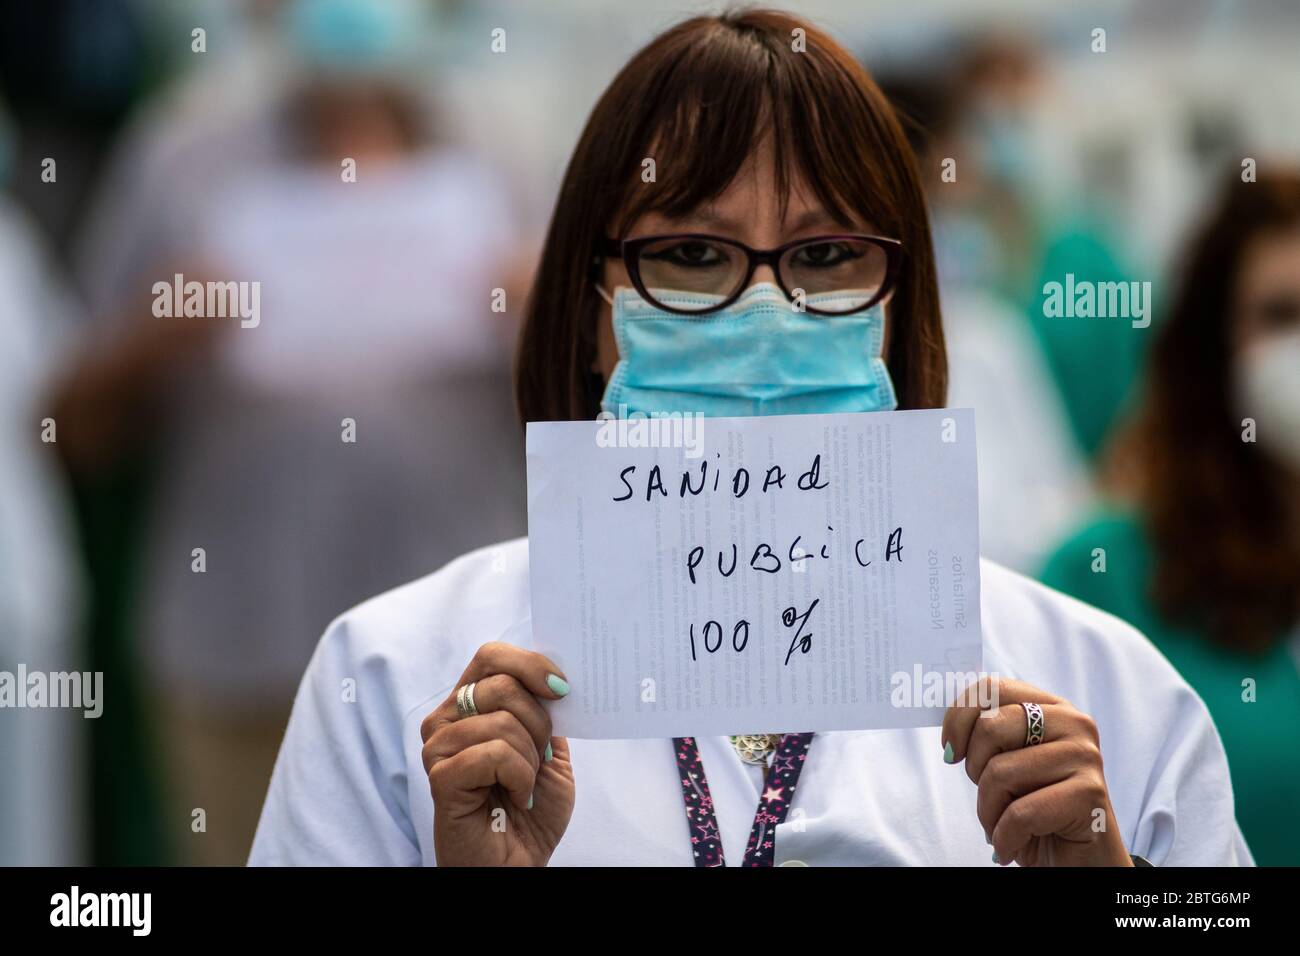 Madrid, Spain. 25th May, 2020. Healthcare worker showing a placard that reads: Health care 100% public, in 12 de Octubre Hospital. Healthcare workers carry out the first protest during the coronavirus crisis against the precariousness of their work as Madrid has entered the so-called Phase One transition from the coronavirus lockdown. Credit: Marcos del Mazo/Alamy Live News Stock Photo